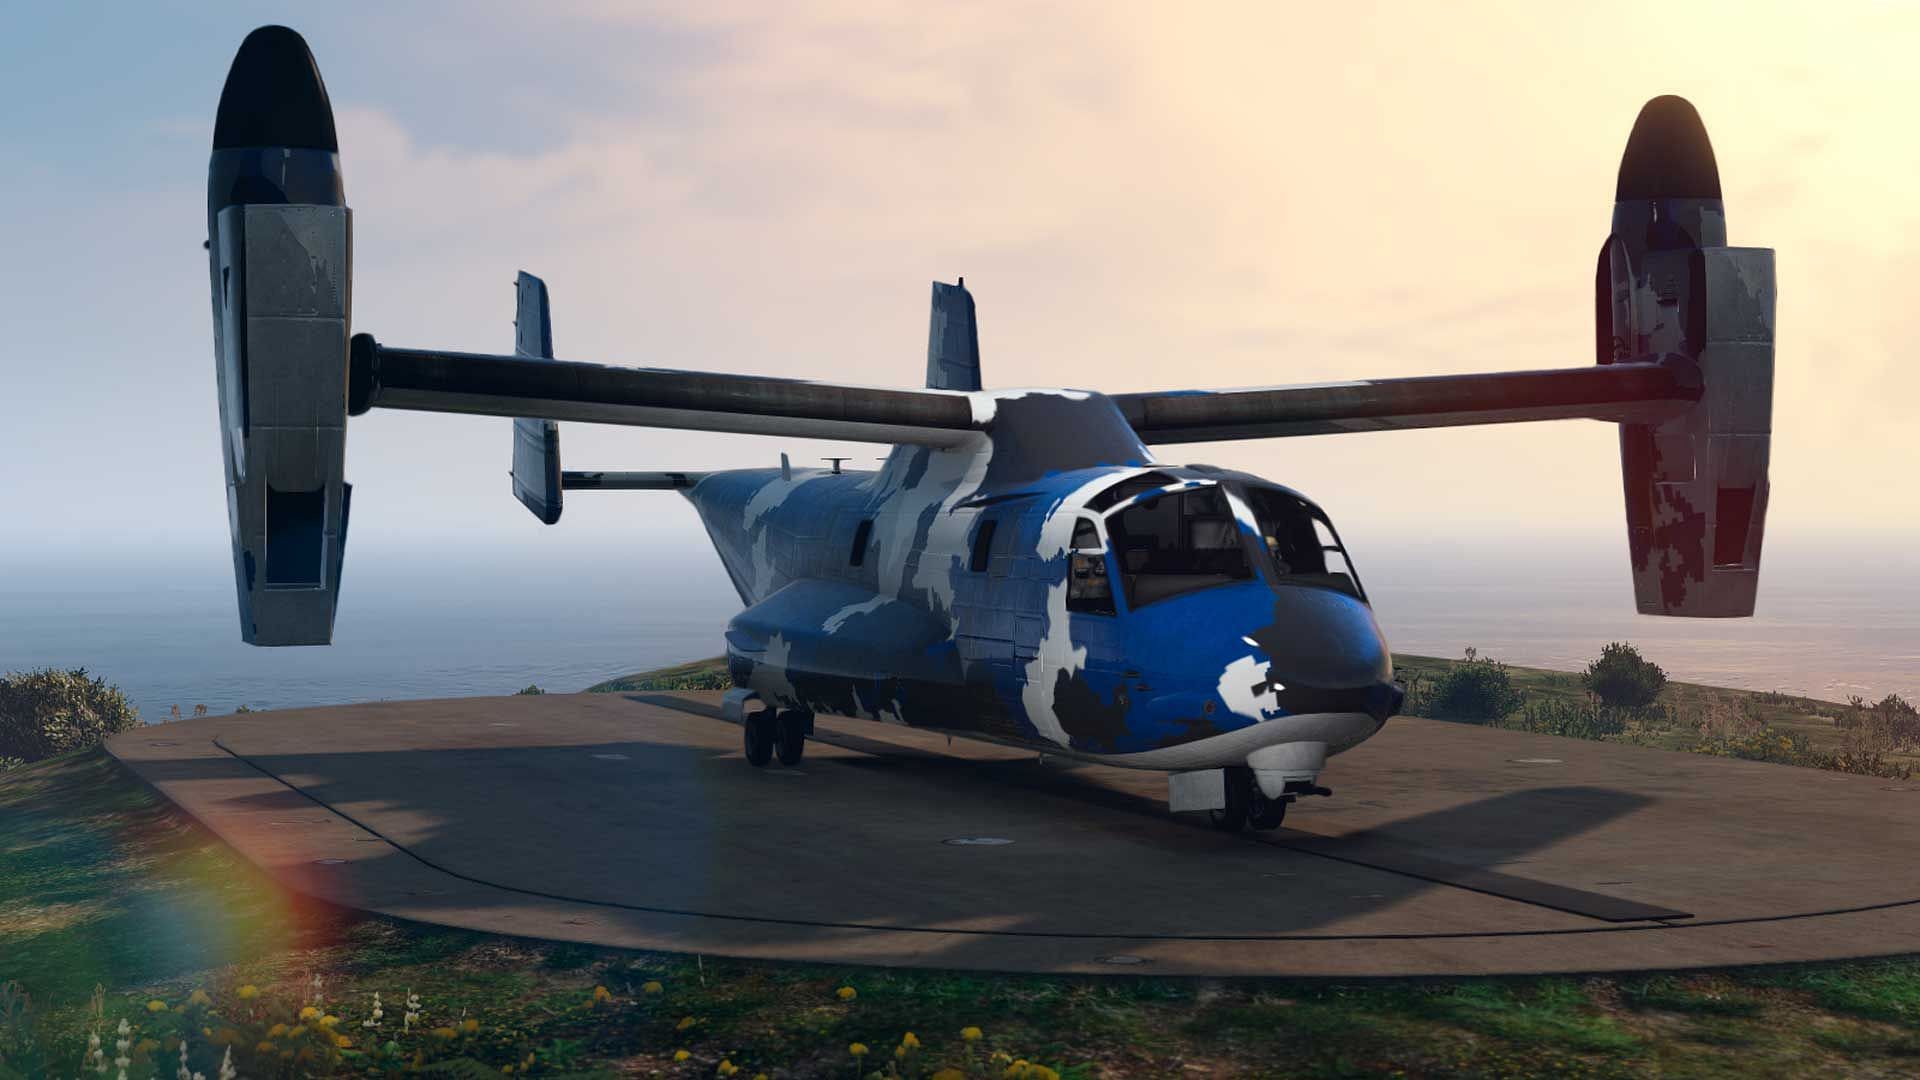 GTA Online players will get used to this vehicle pretty quickly (Image via Rockstar Games)